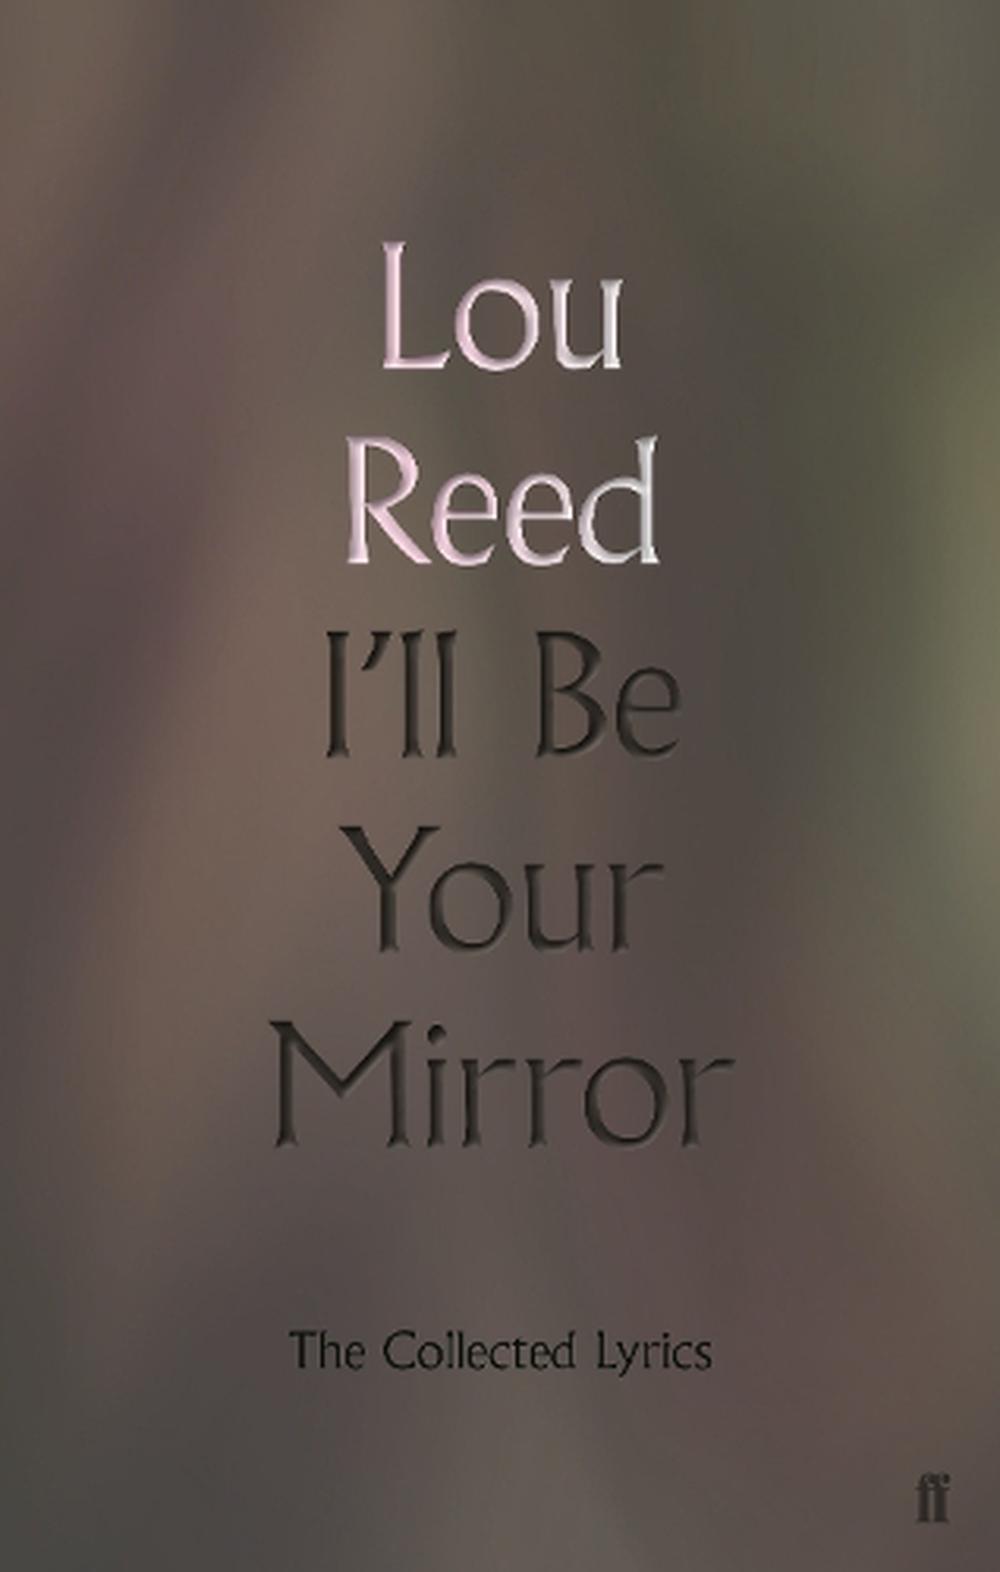 I'll be Your Mirror: The Collected Lyrics by Lou Reed (English